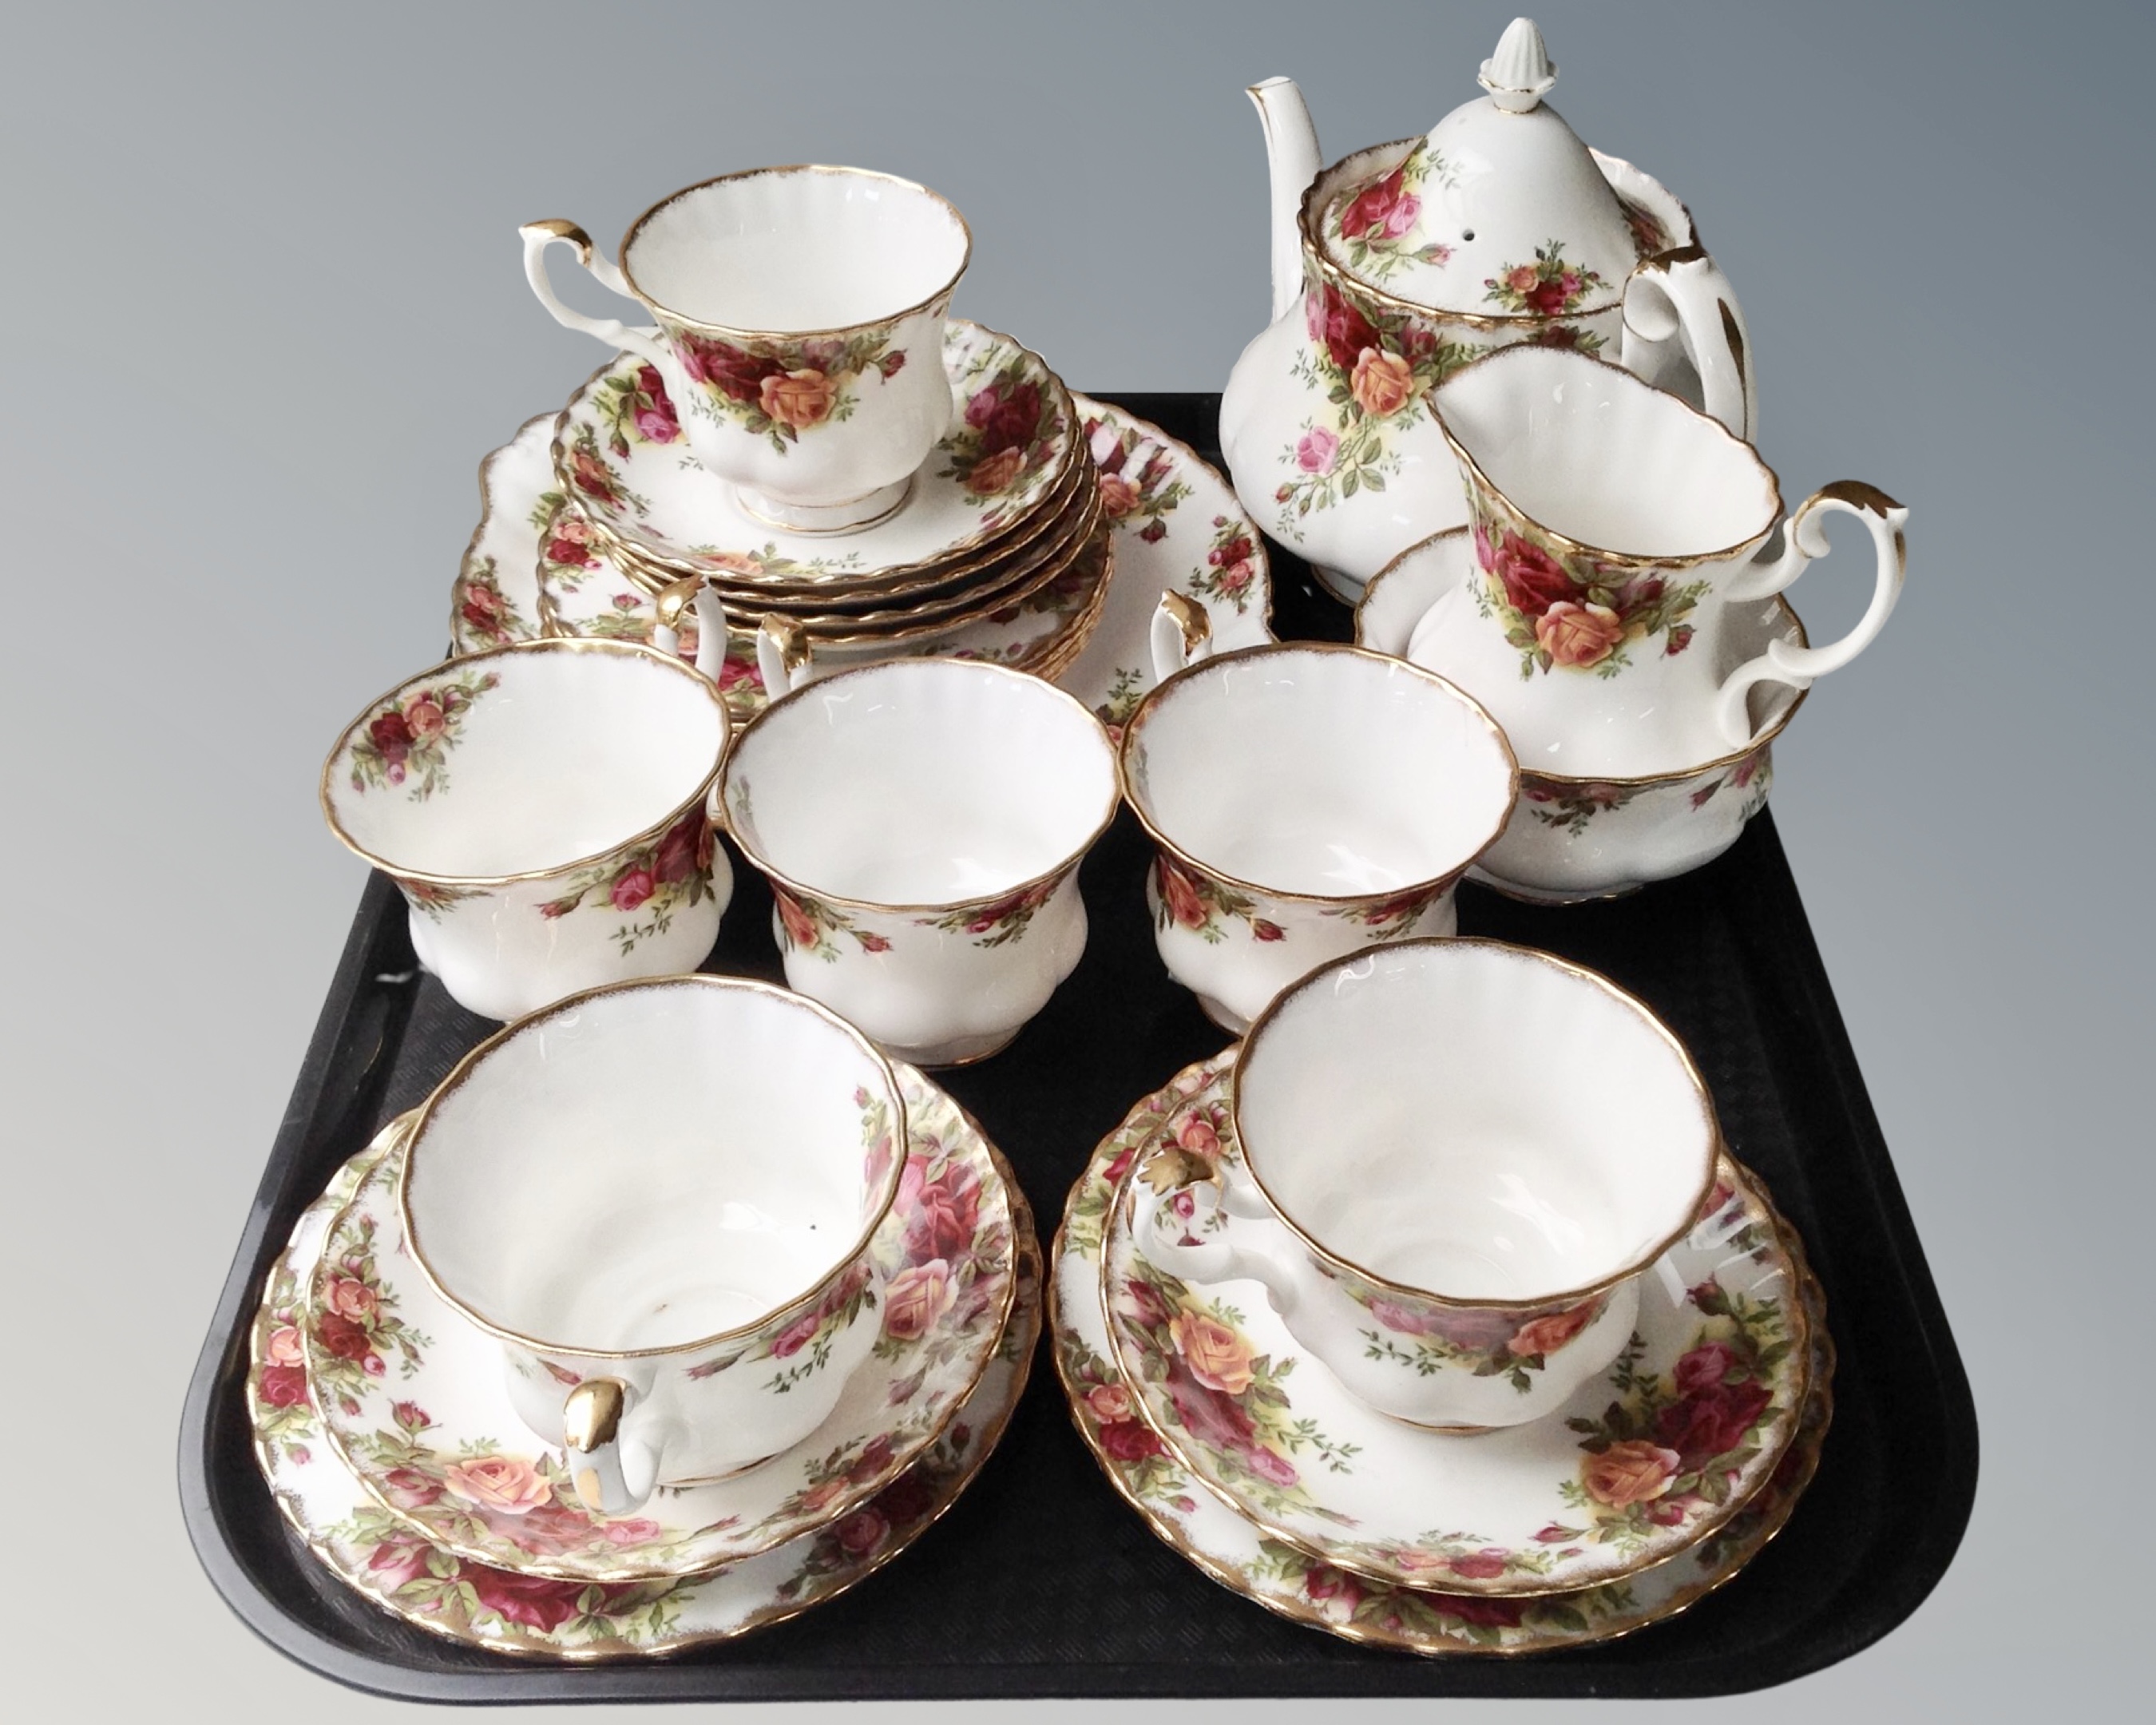 Approximately 21 pieces of Royal Albert Old Country Roses tea china.